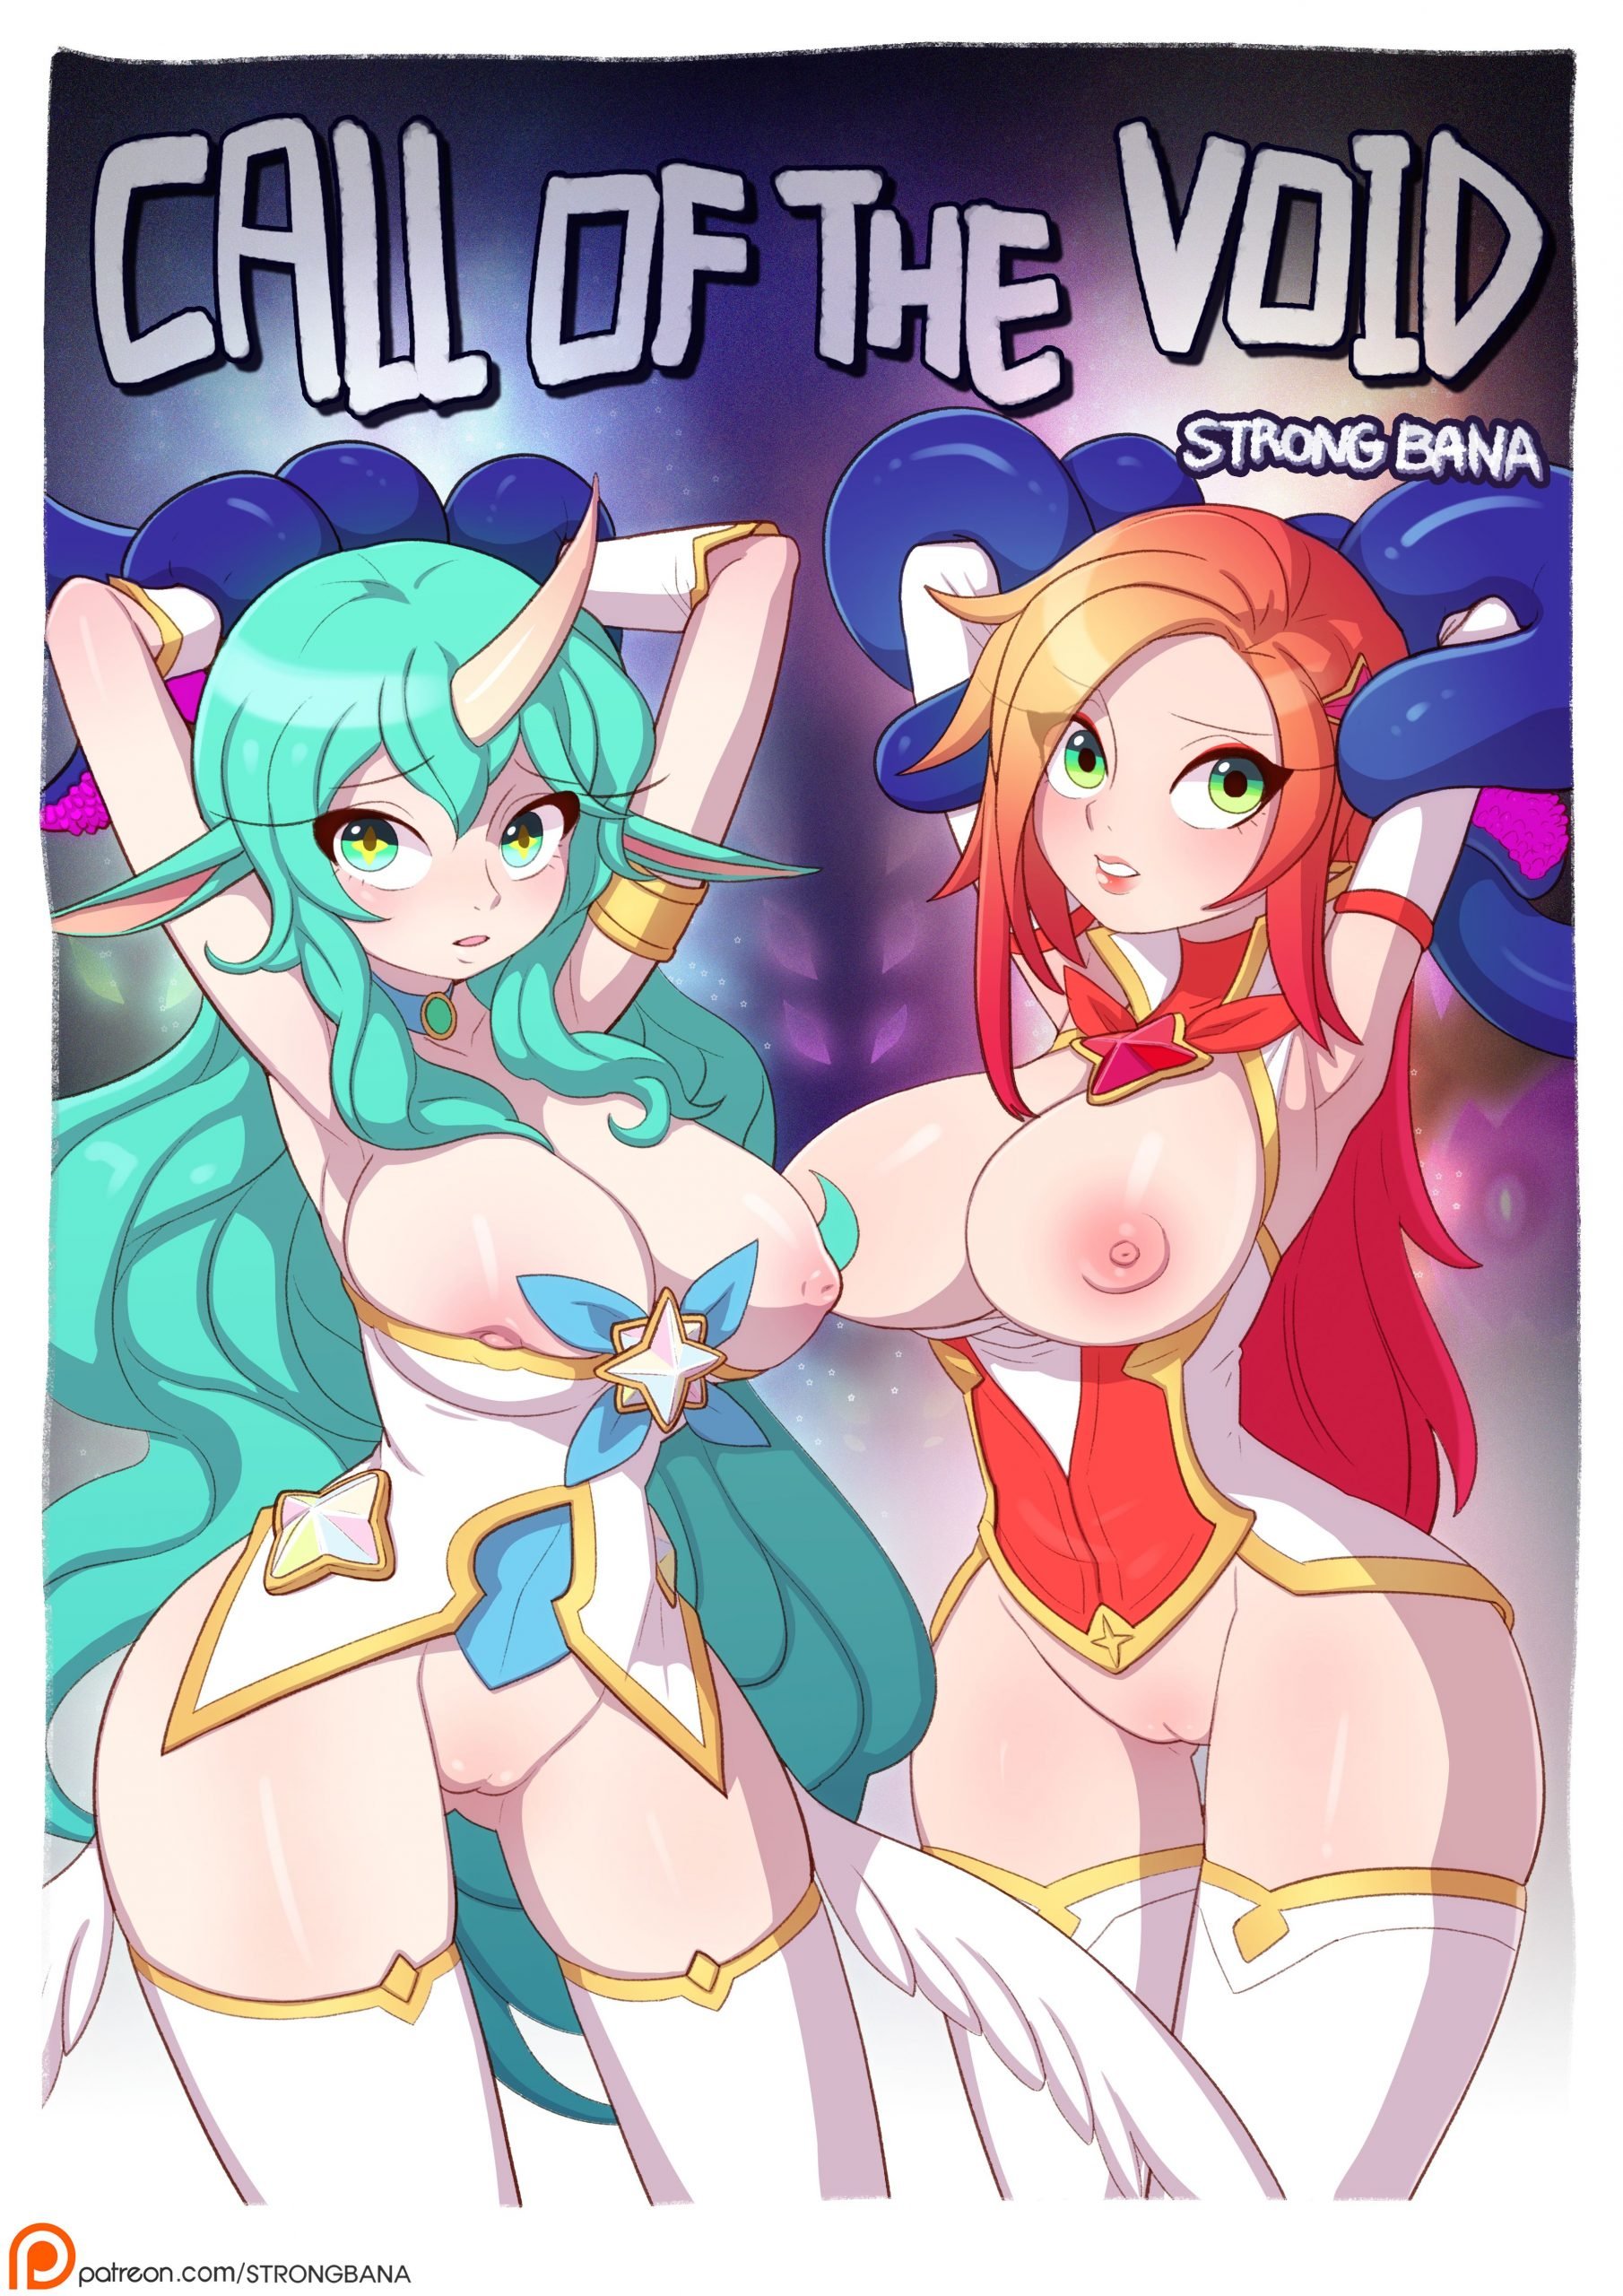 Six Xxx Voidy - Call of the Void (League of Legends) [Strong Bana] Porn Comic - AllPornComic